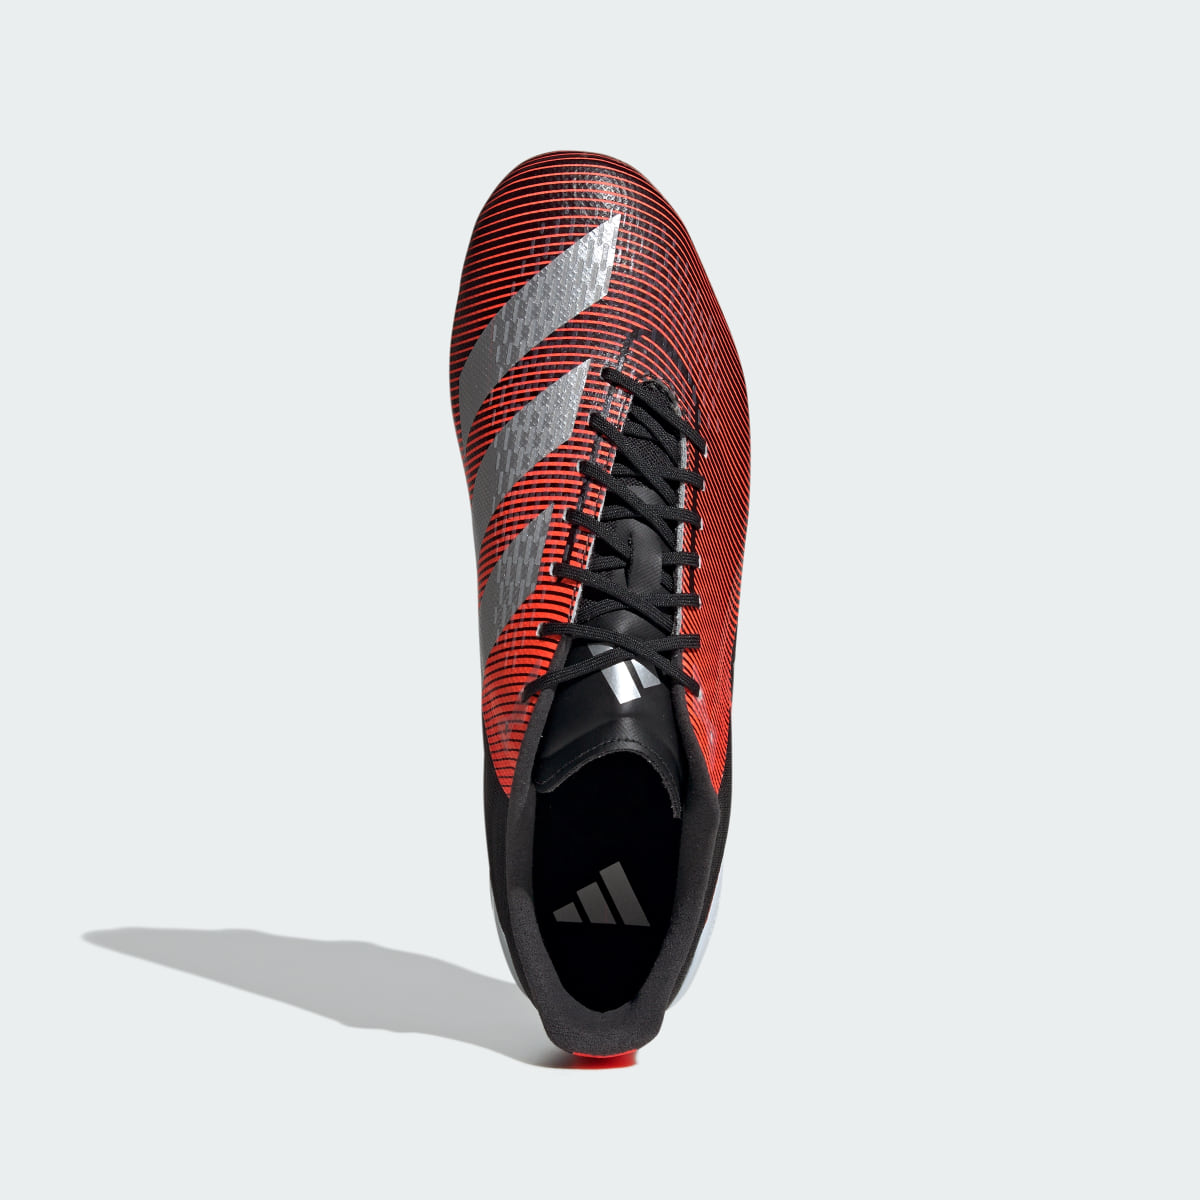 Adidas Adizero RS15 Pro Firm Ground Rugby Boots. 7